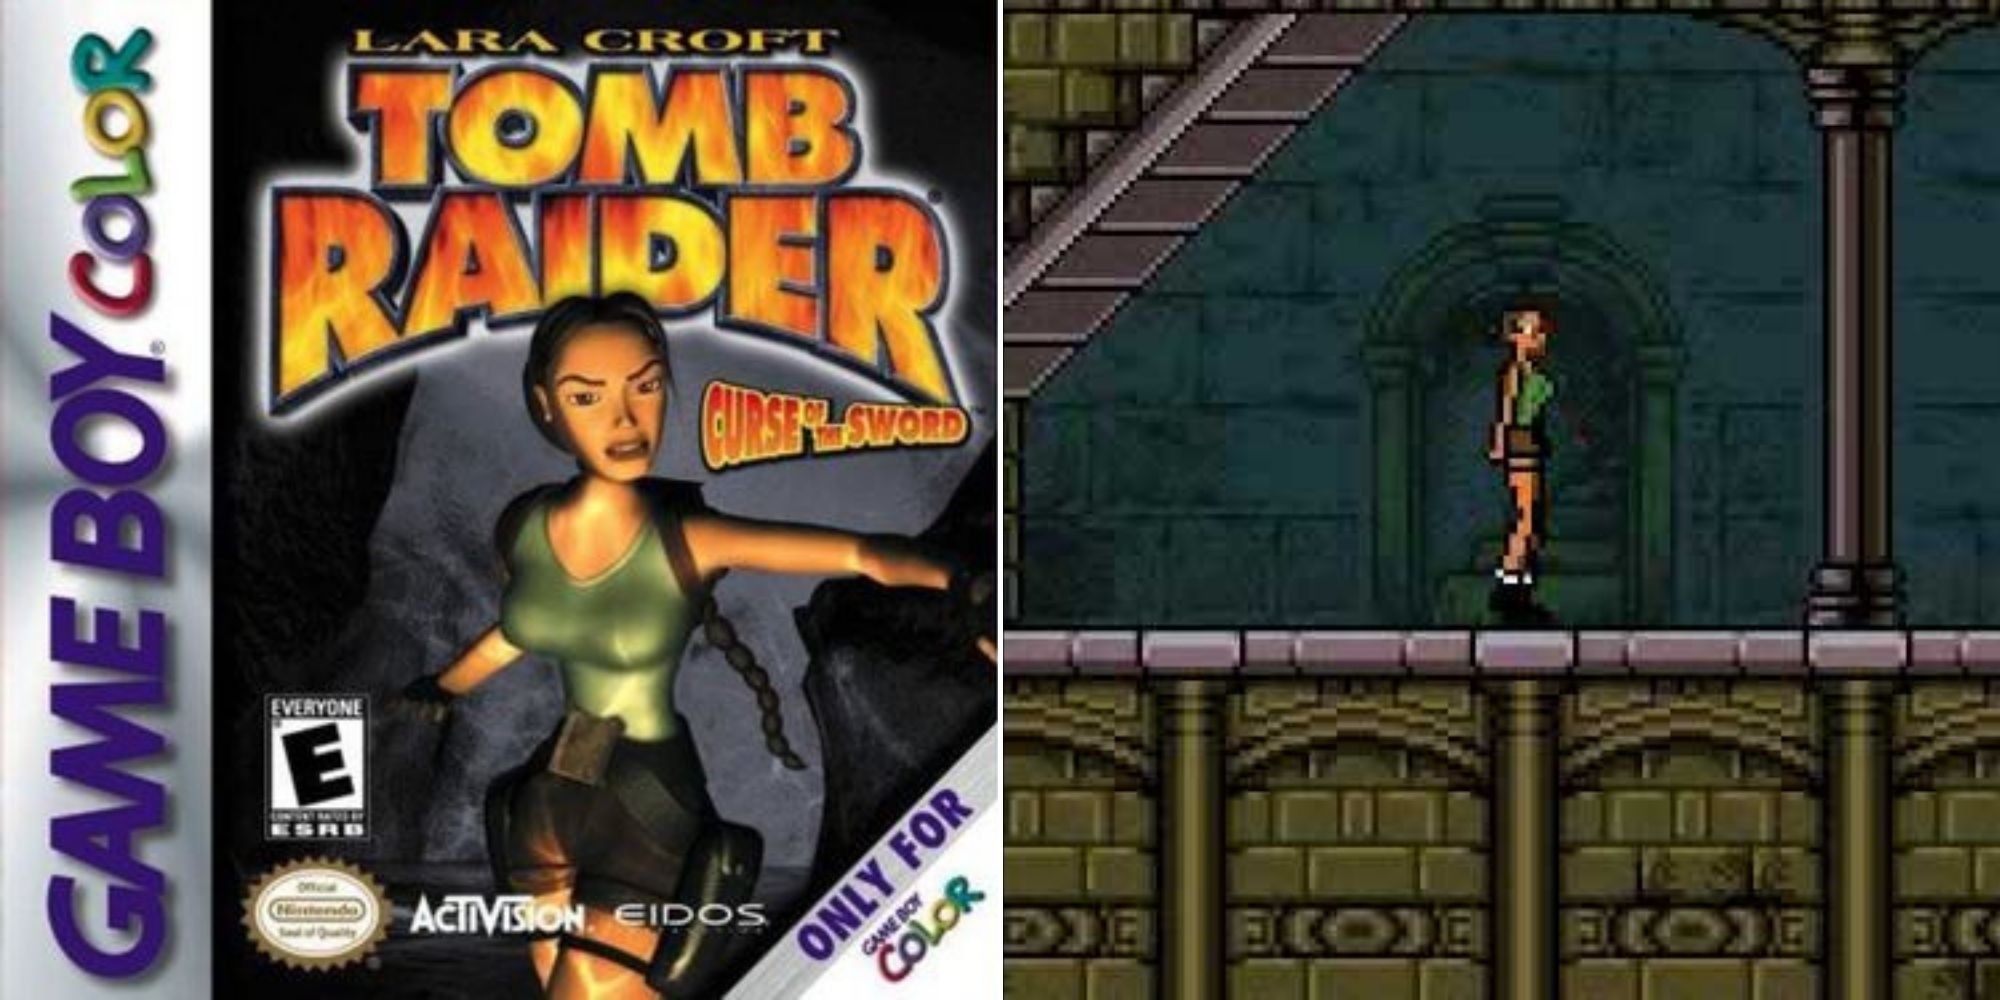 Tomb Raider: Curse Of The Sword Cover Art For Game Boy Color And Lara Exploring A Tomb.